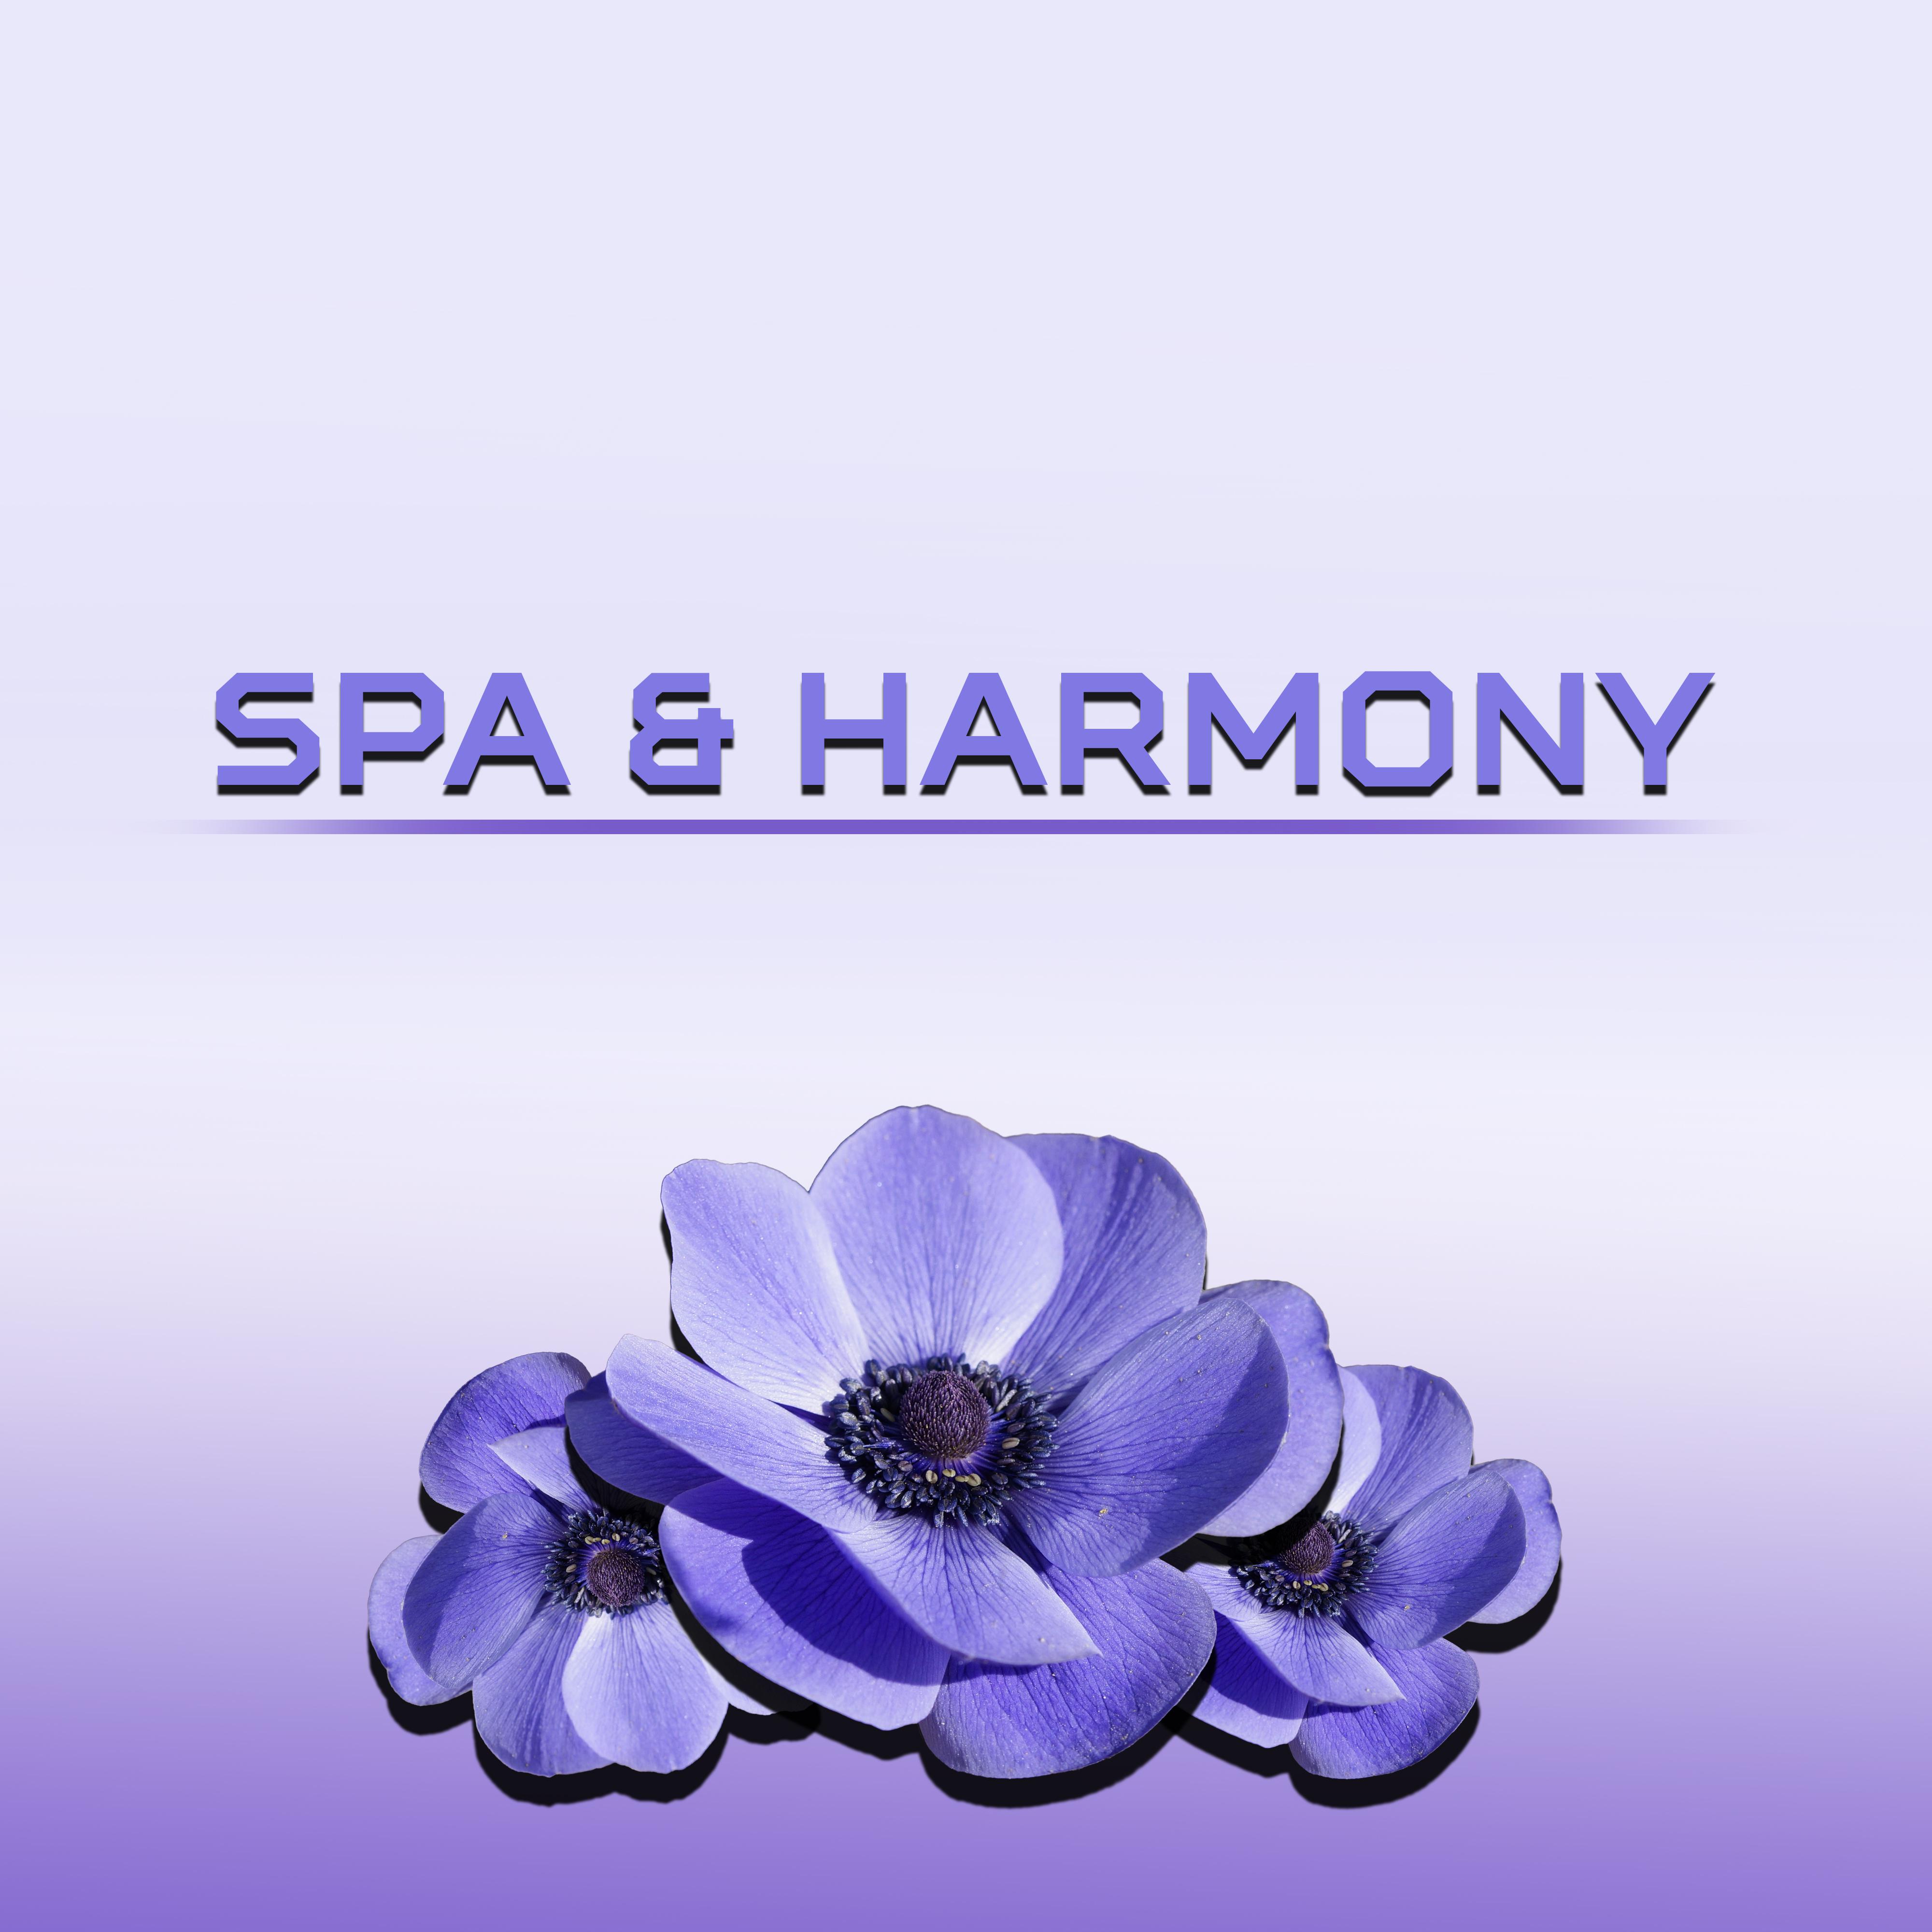 Spa  Harmony  Soft Music for Massage, Spa, Wellness, Nature Sounds for Relaxation, Zen Garden, Spa Dreams, Peaceful Mind